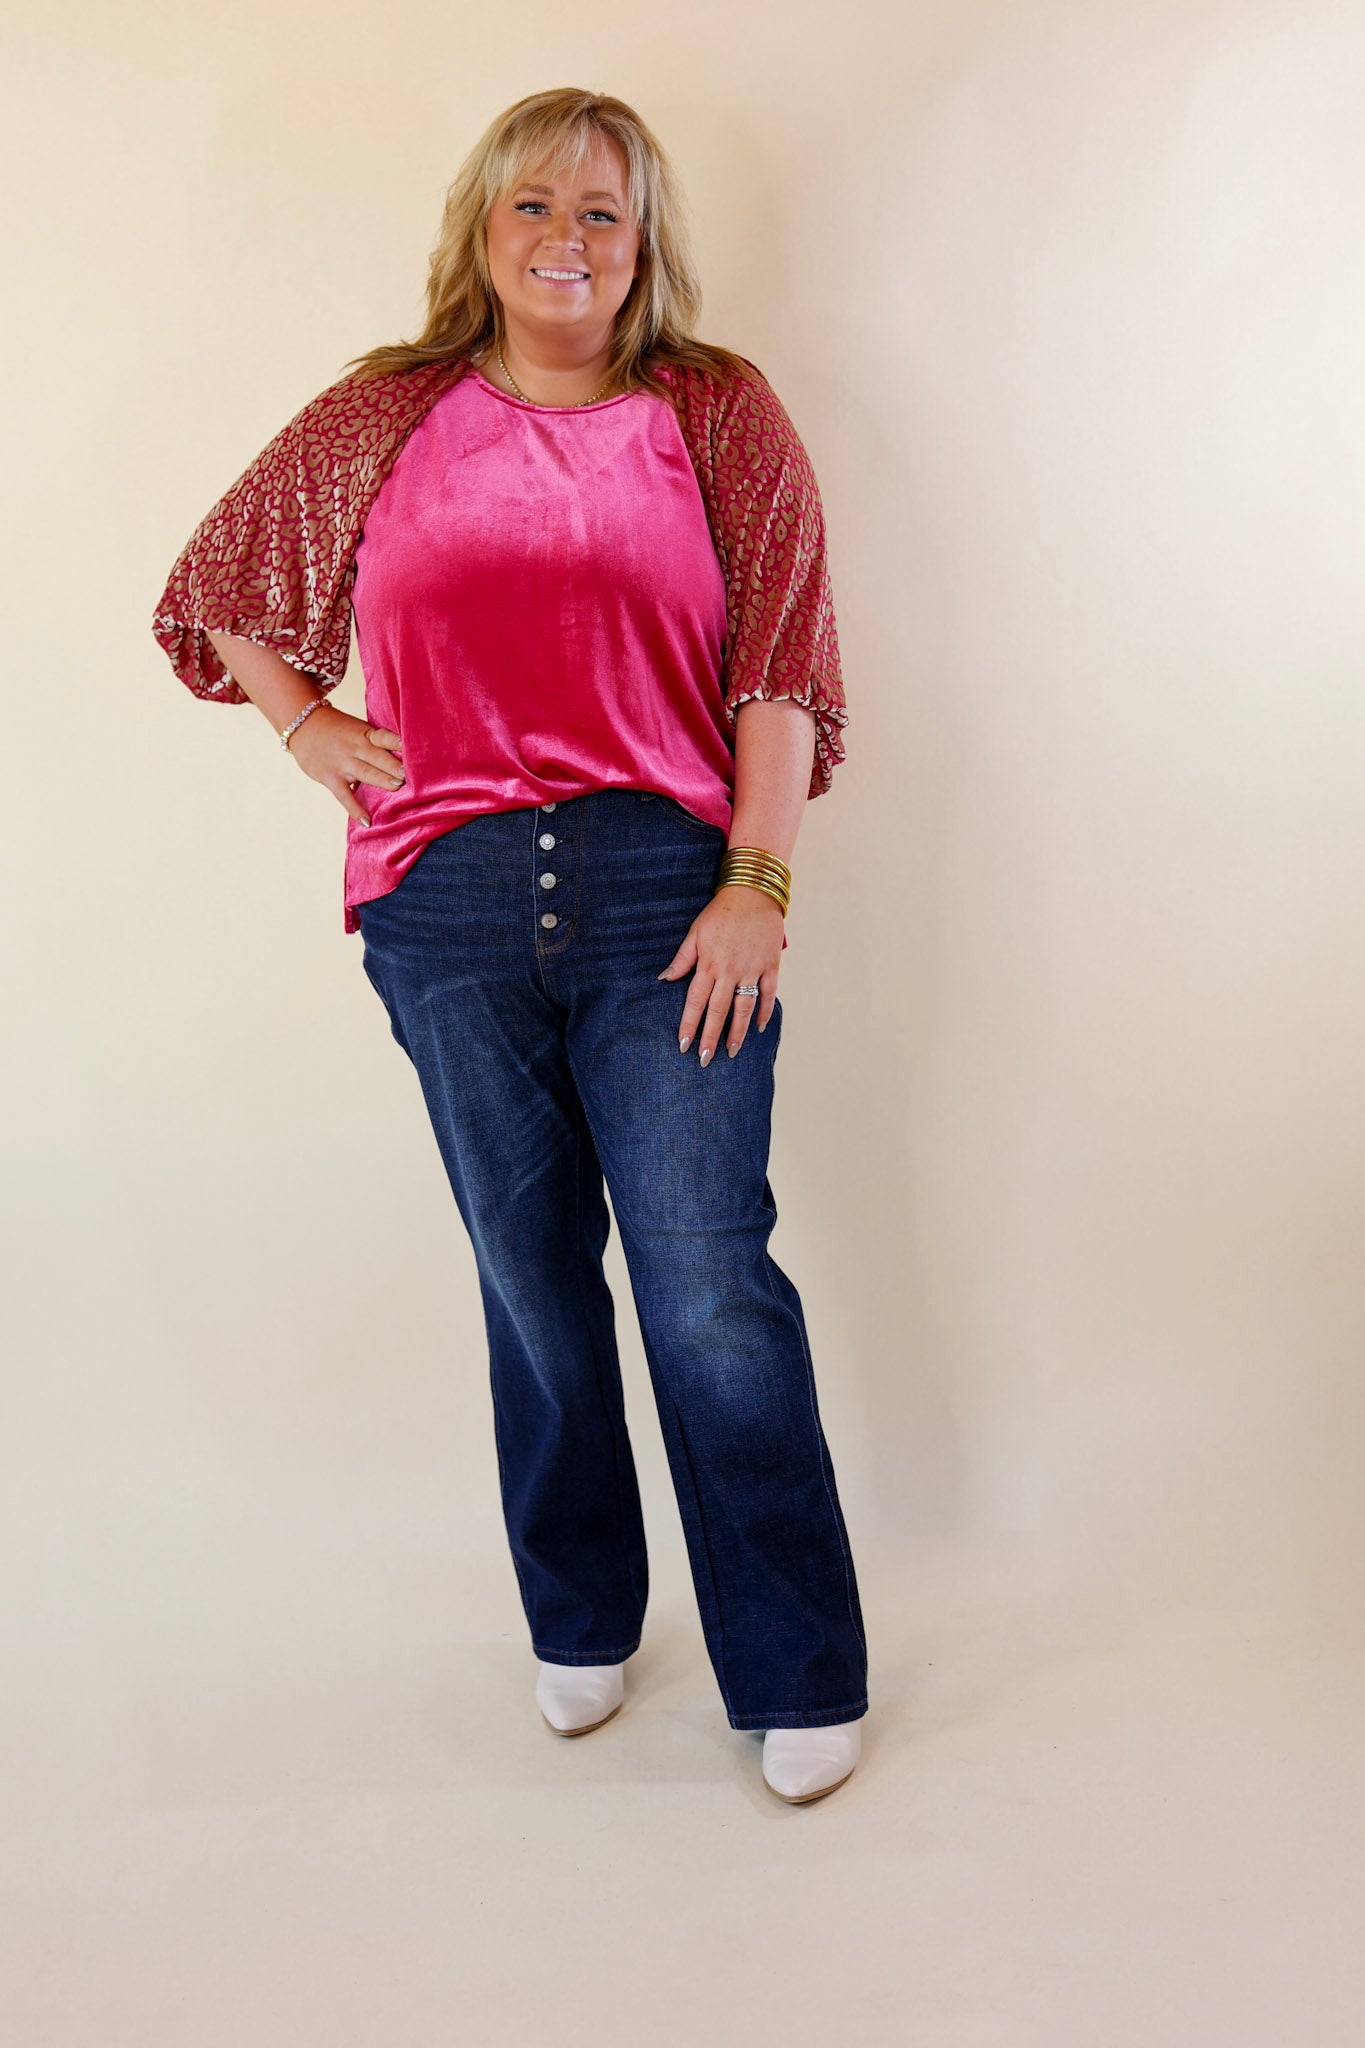 Keeping Warm Button Up Animal Print Velvet Long Sleeve Blouse in Raspberry Red - Giddy Up Glamour Boutique